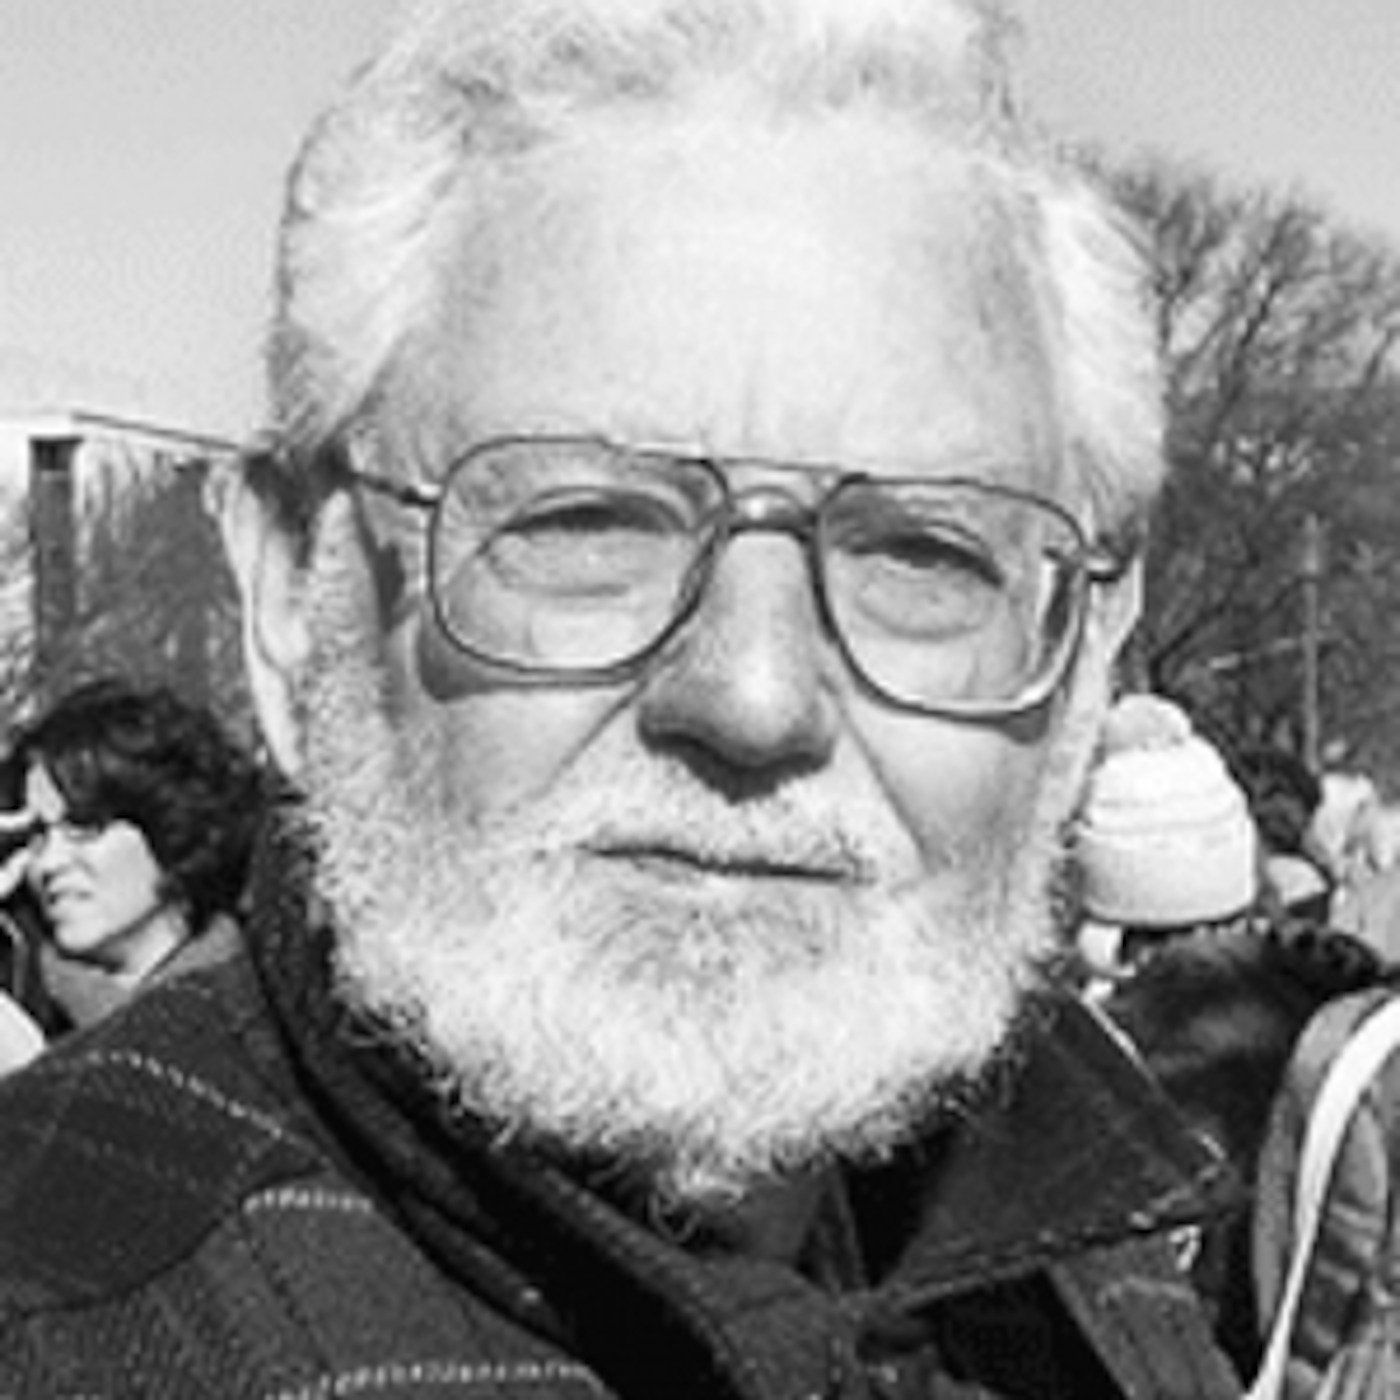 William Blum's Legacy Smeared in NYT's Obituary Pages